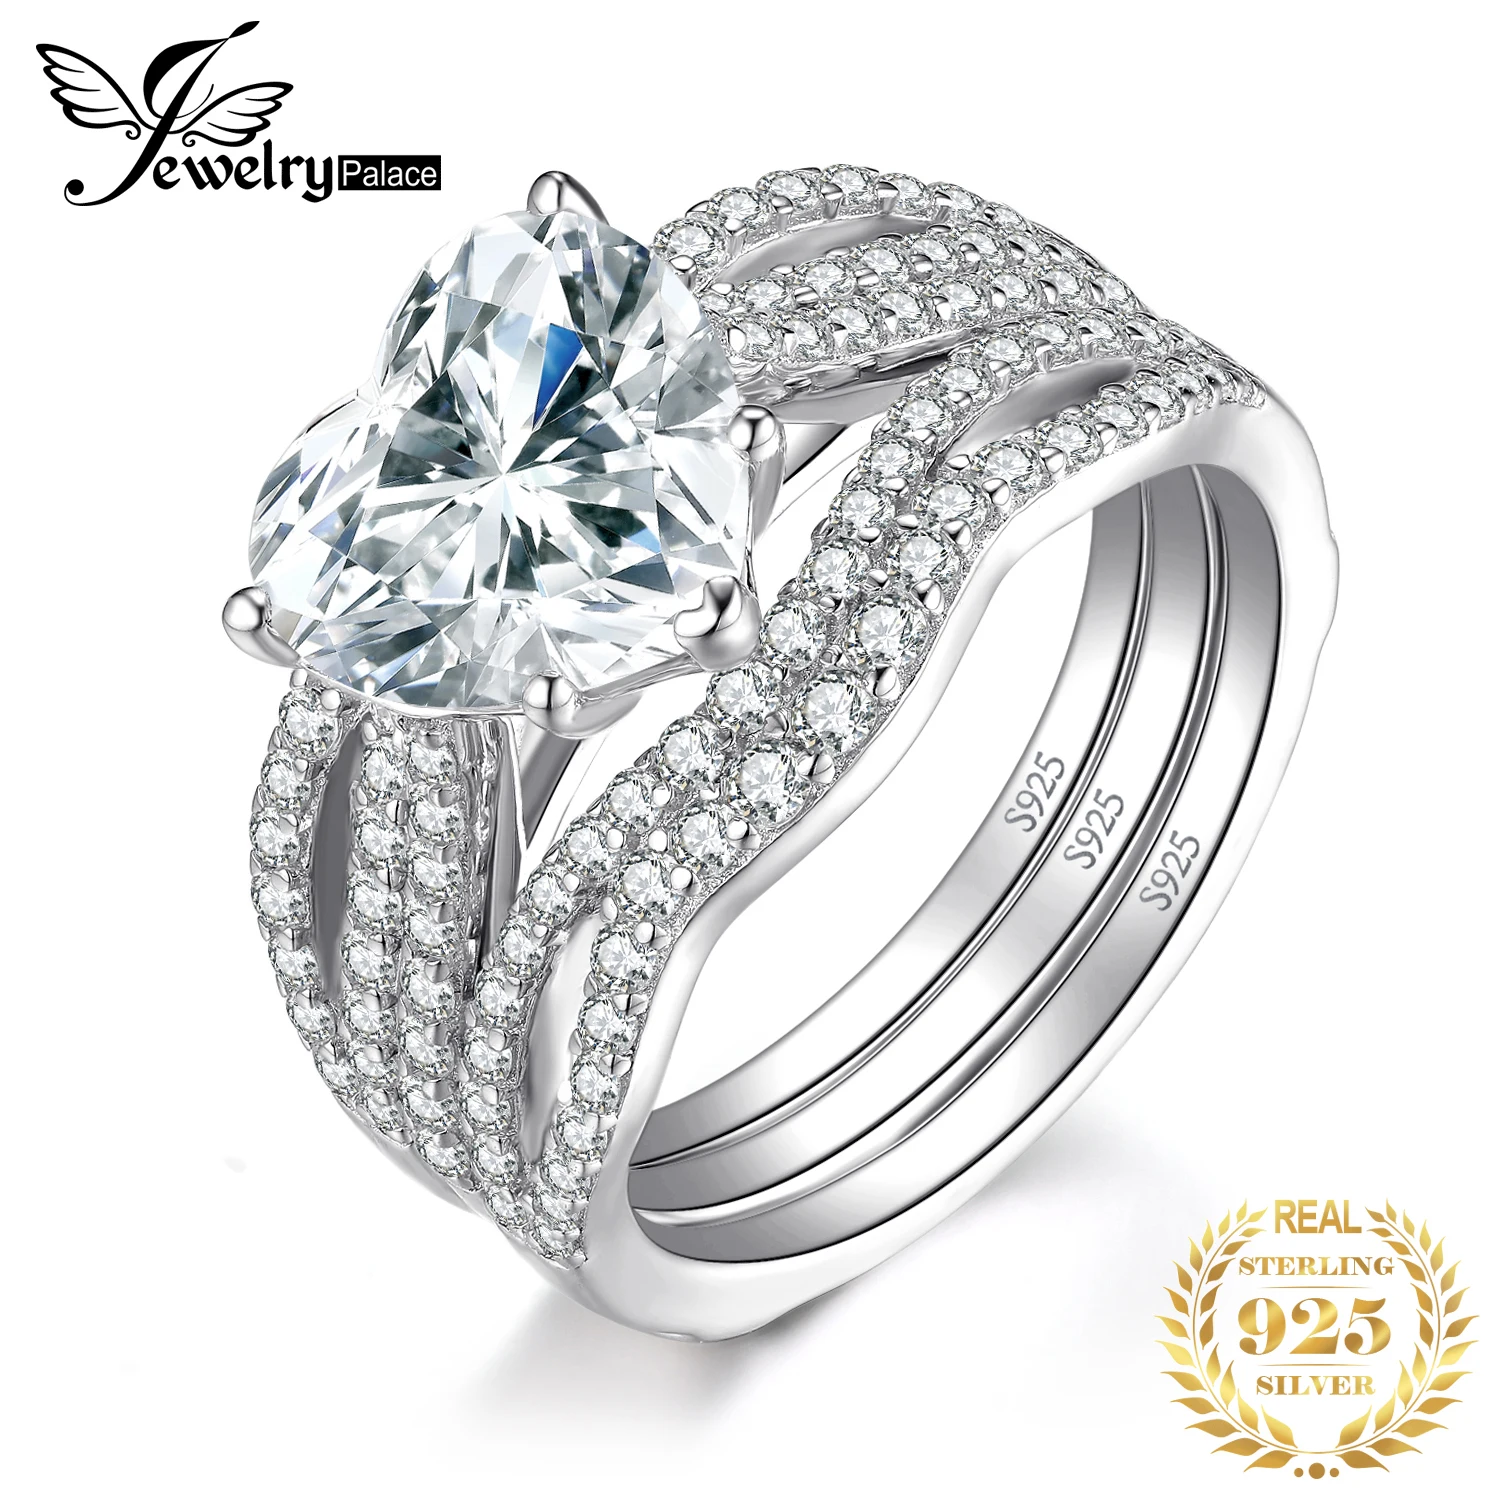 

JewelryPalace Love Heart 3.1ct Cubic Zirconia 925 Sterling Silver Solitaire Engagement Ring for Woman Bridal Sets Wedding Band